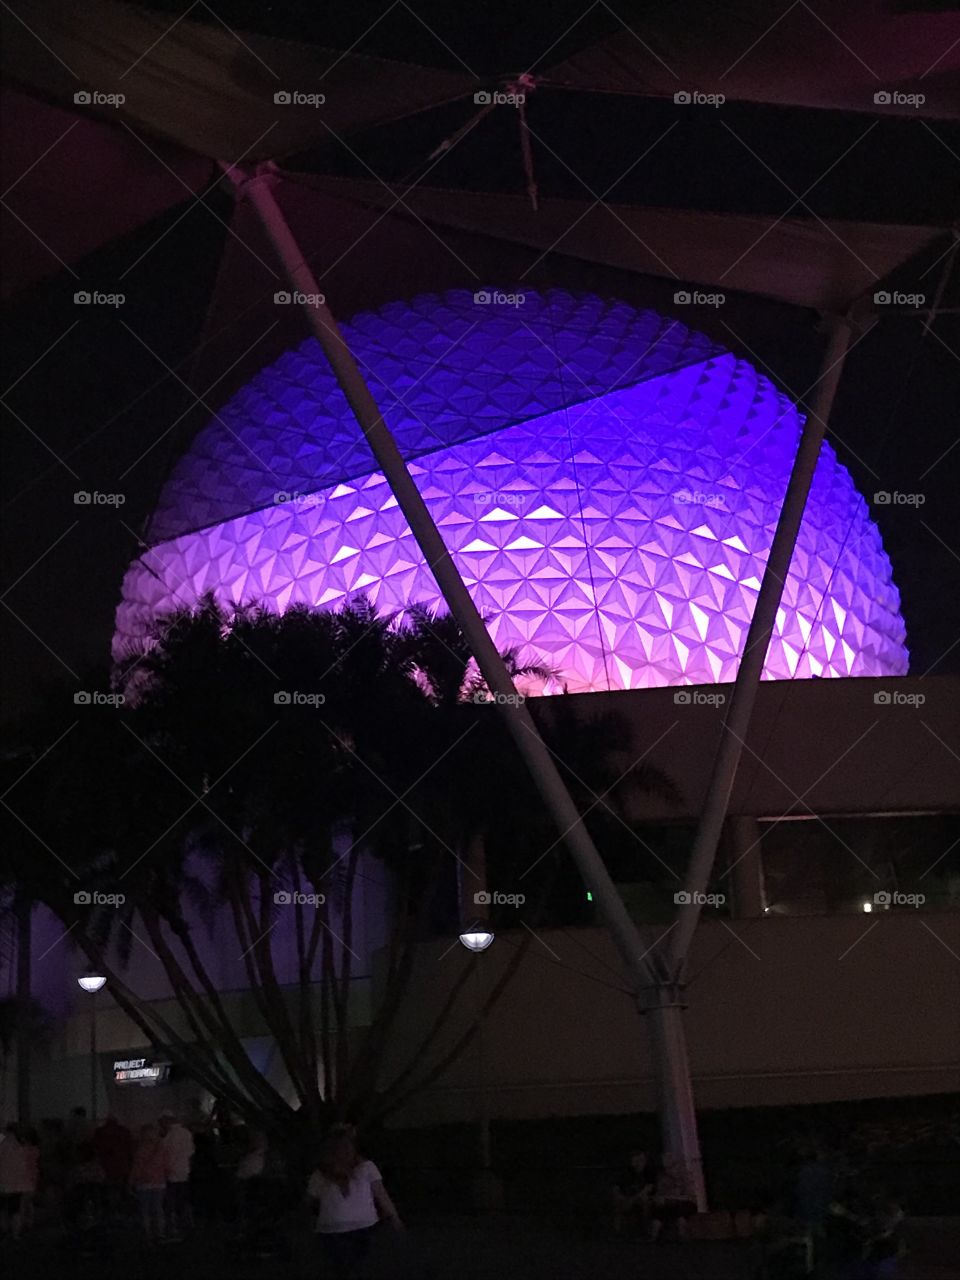 This picture shows the Epcot ball at Walt Disney World. It is illuminated with colorful lights so it can still be seen at night.